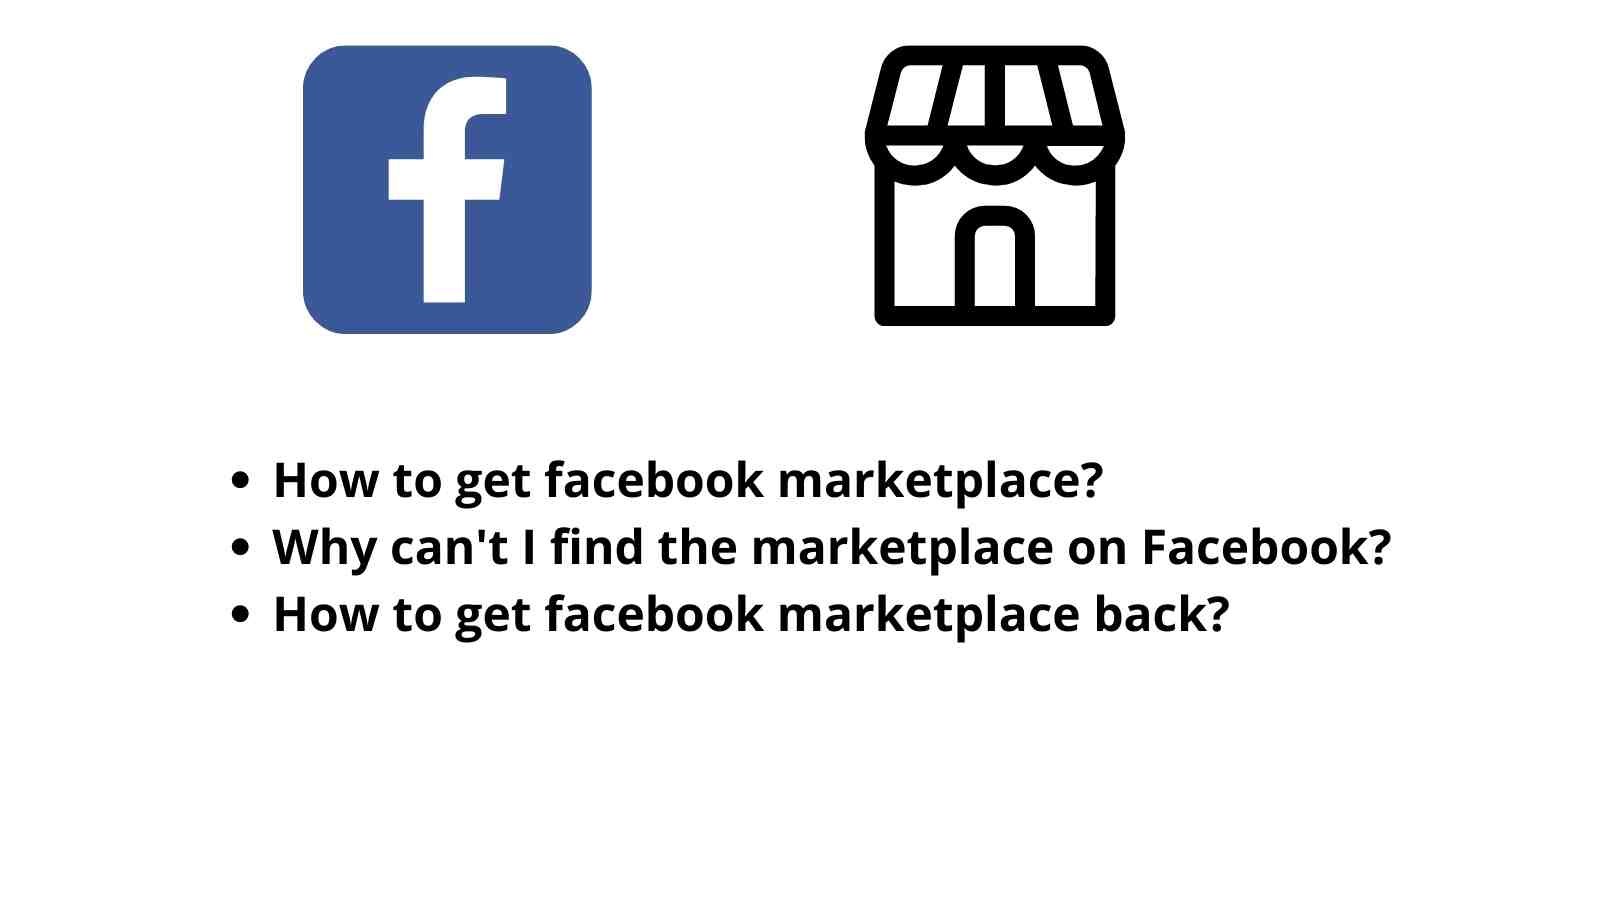 how to get facebook marketplace back-Why can't I find the marketplace on Facebook